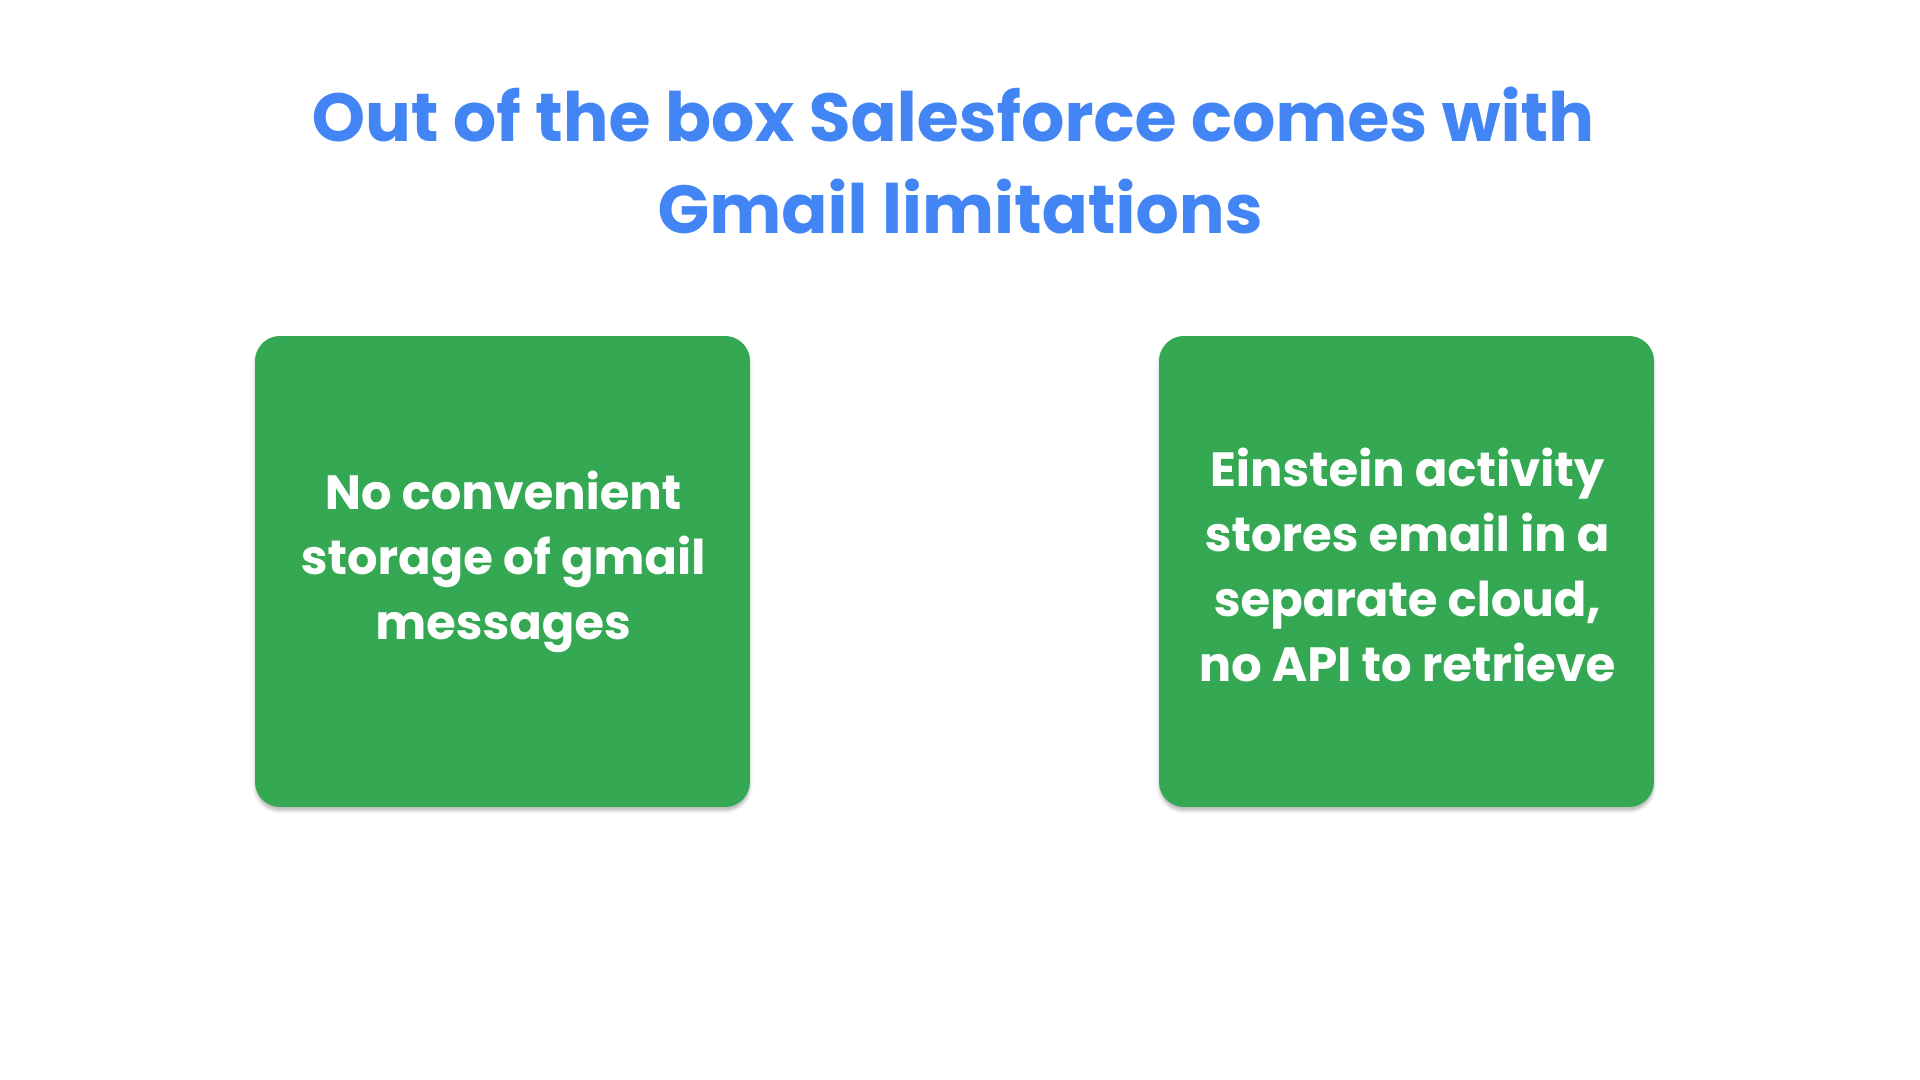 This image shows the key problems by not having Gmail integrated with Salesforce